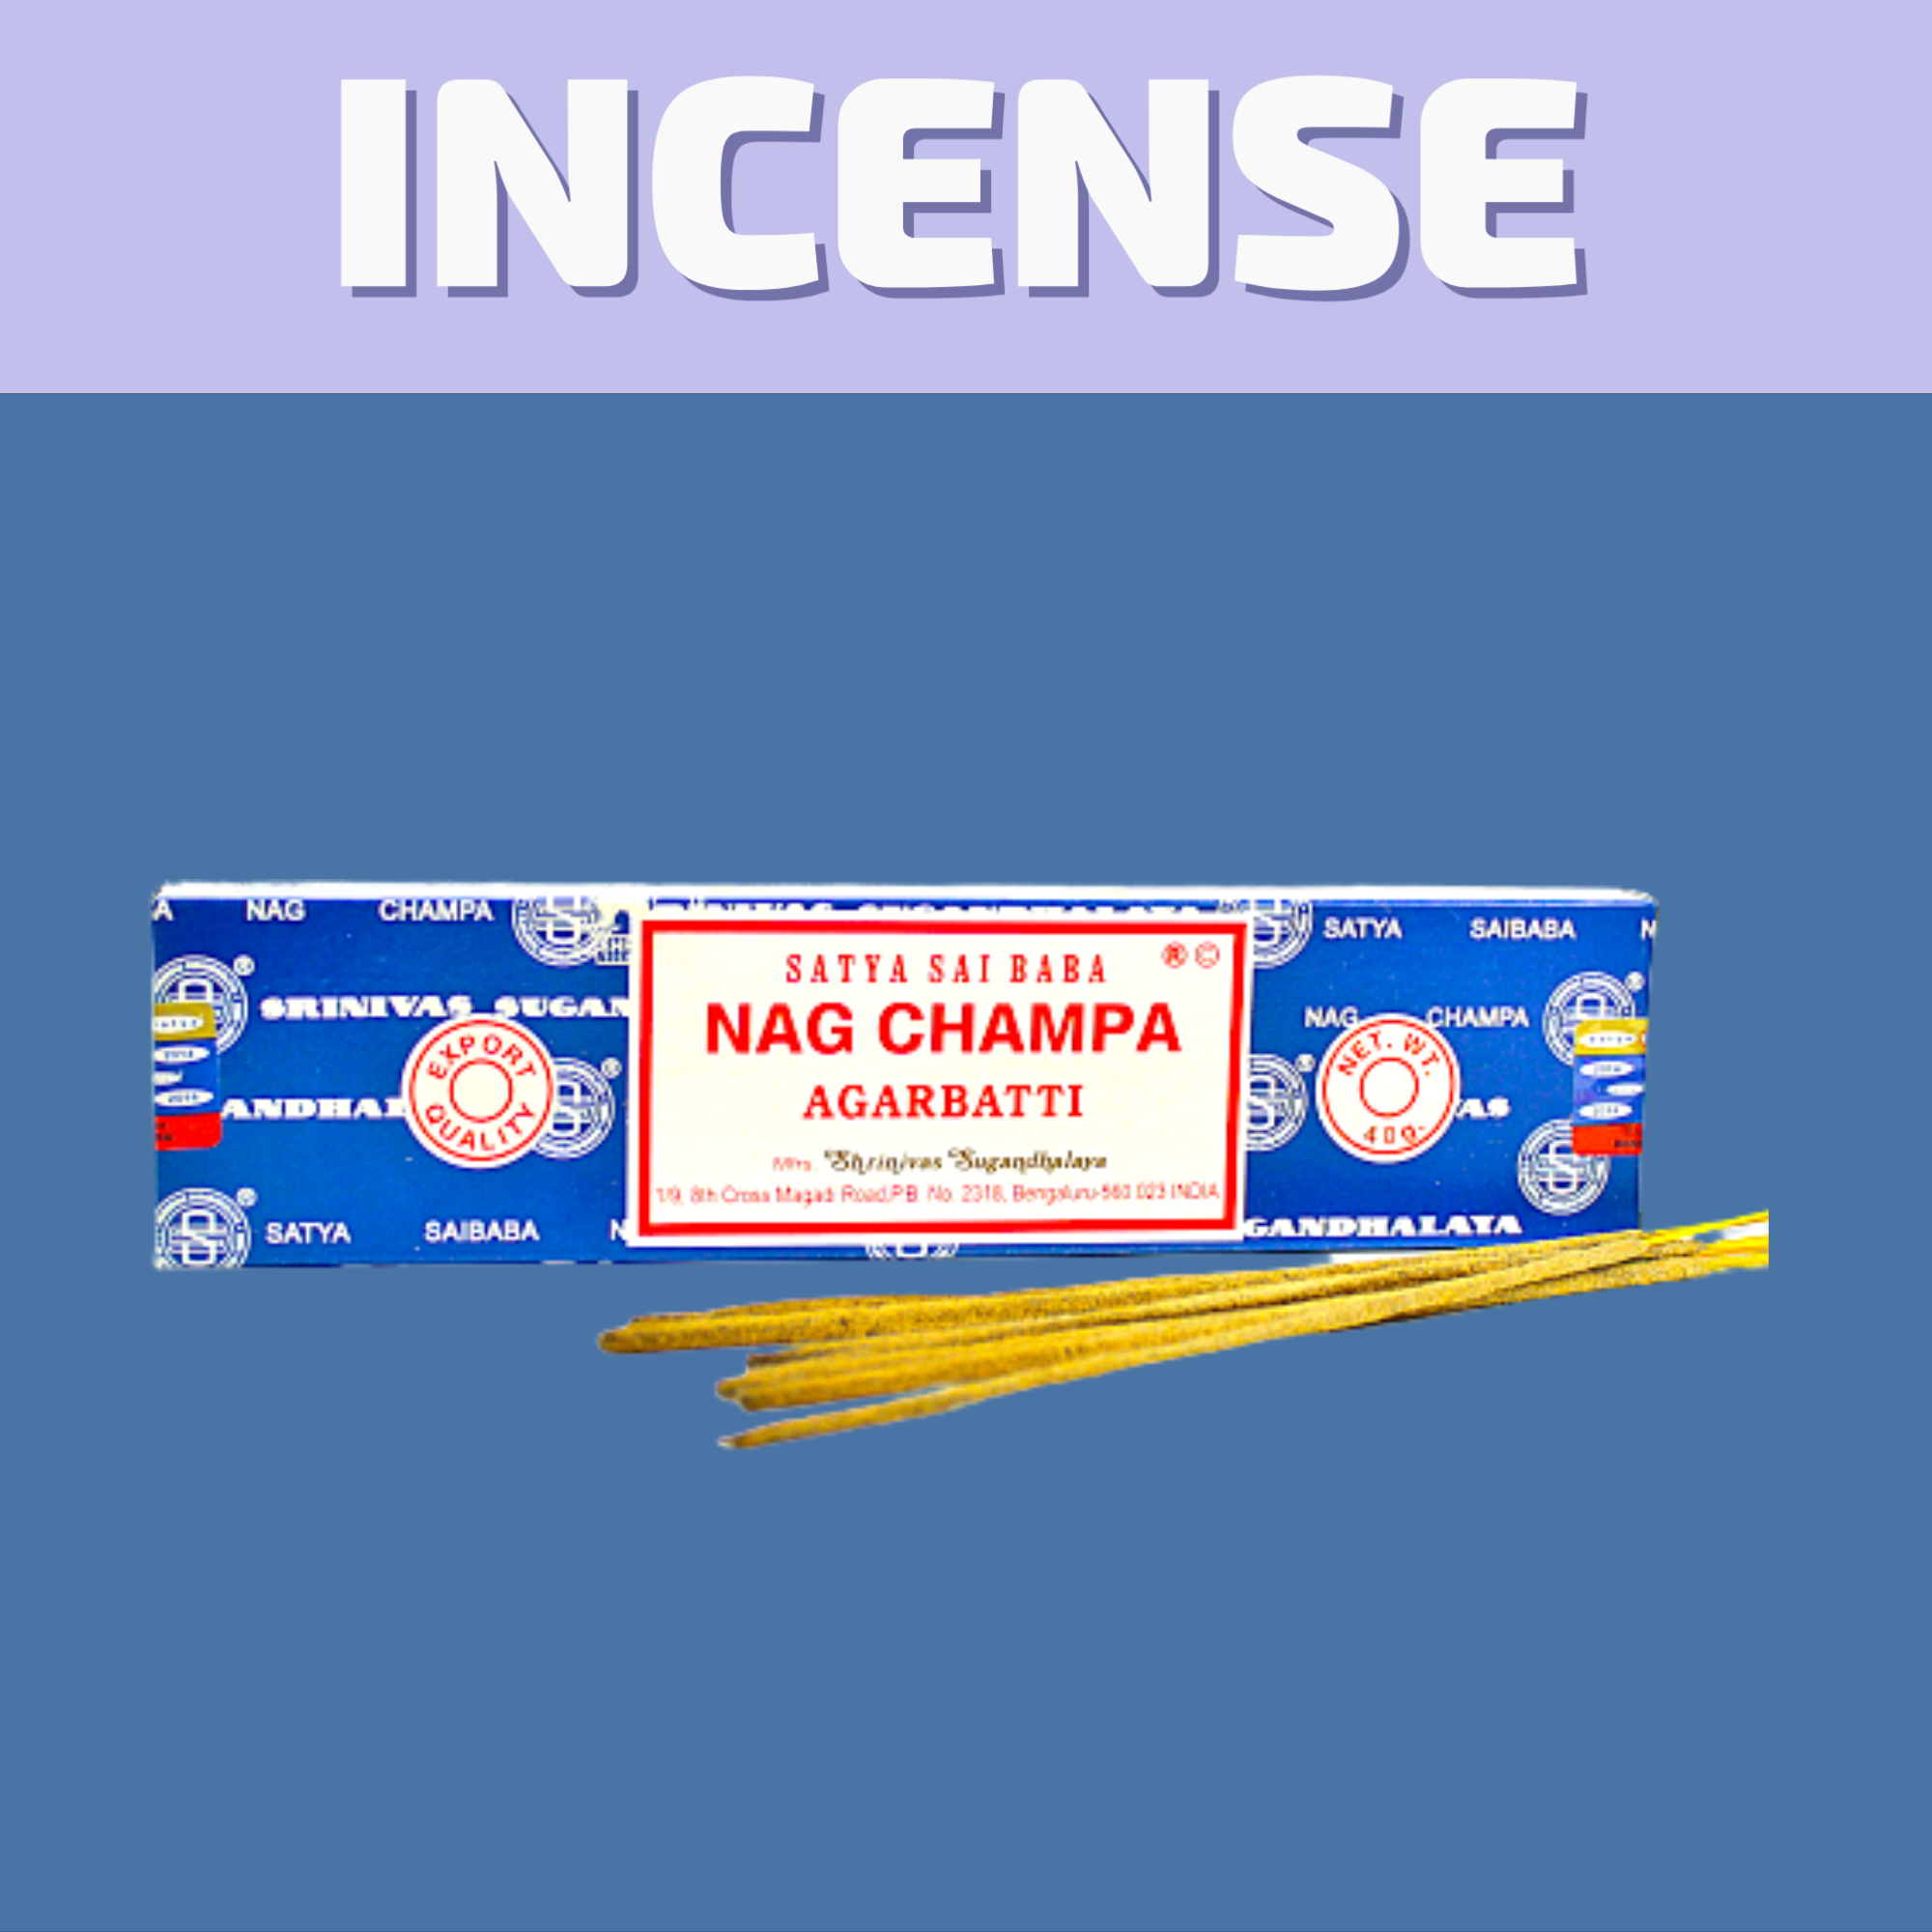 Shop our selection of Incense for same day delivery in Winnipeg or pick up at Winnipeg's best dispensary.